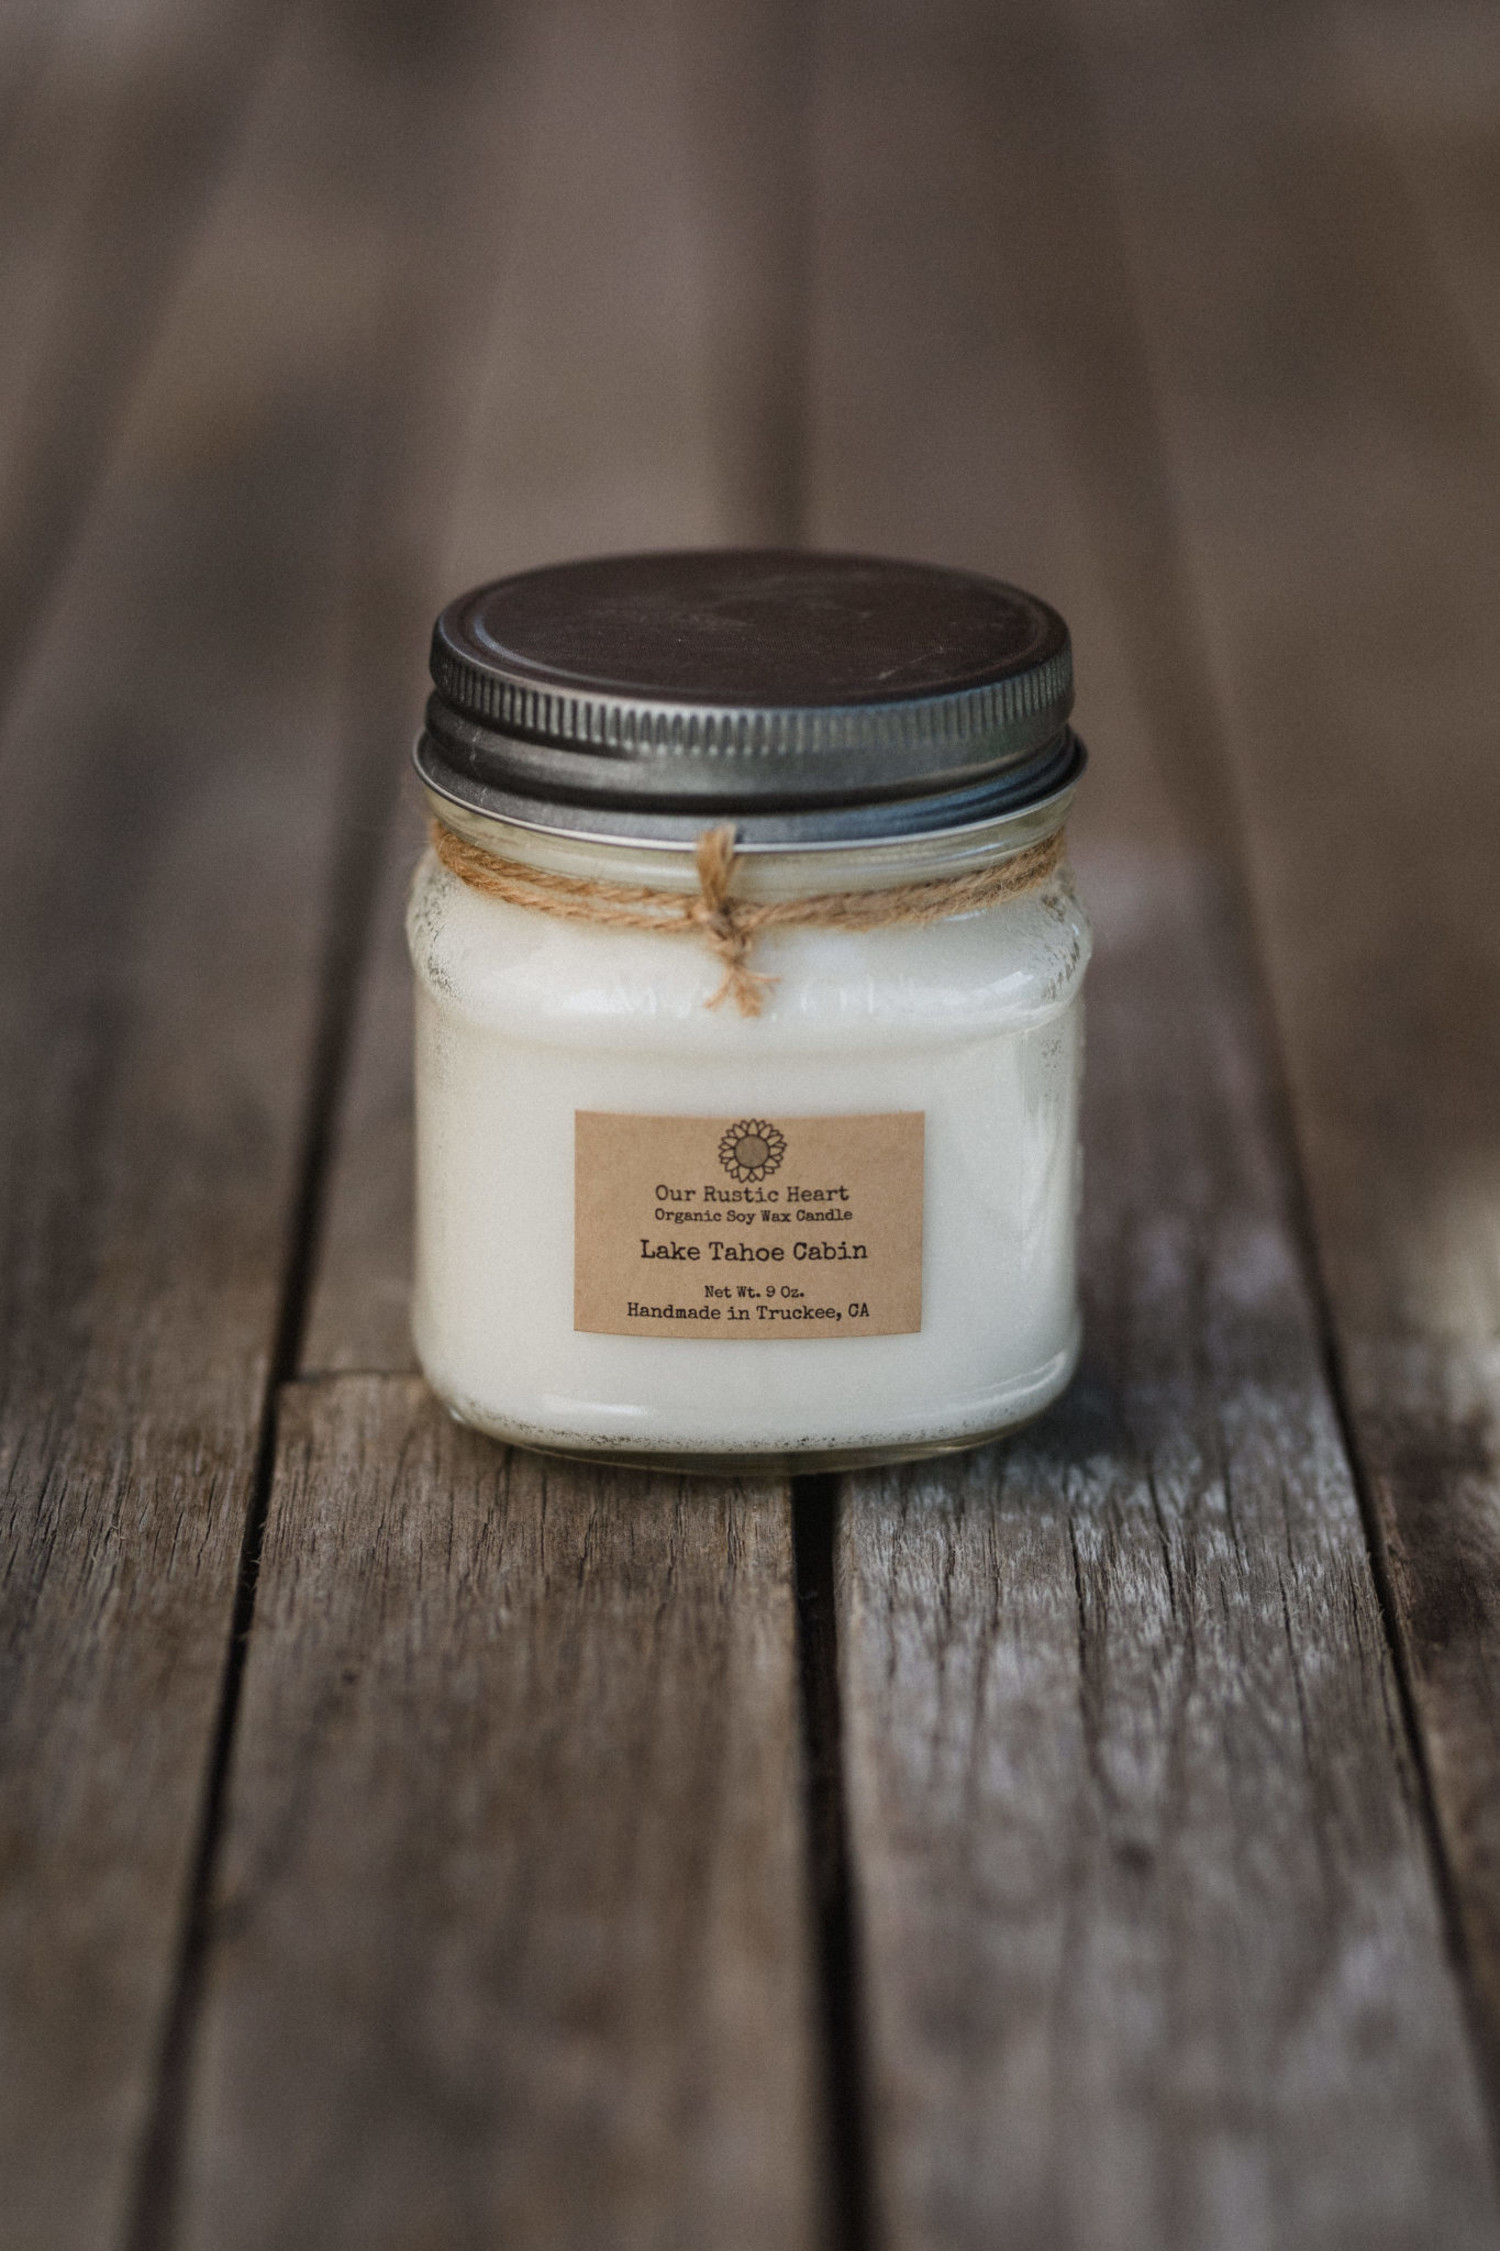 Tree of Life Warmer & Wax Melt Bundle — Our Rustic Heart Candle Co.